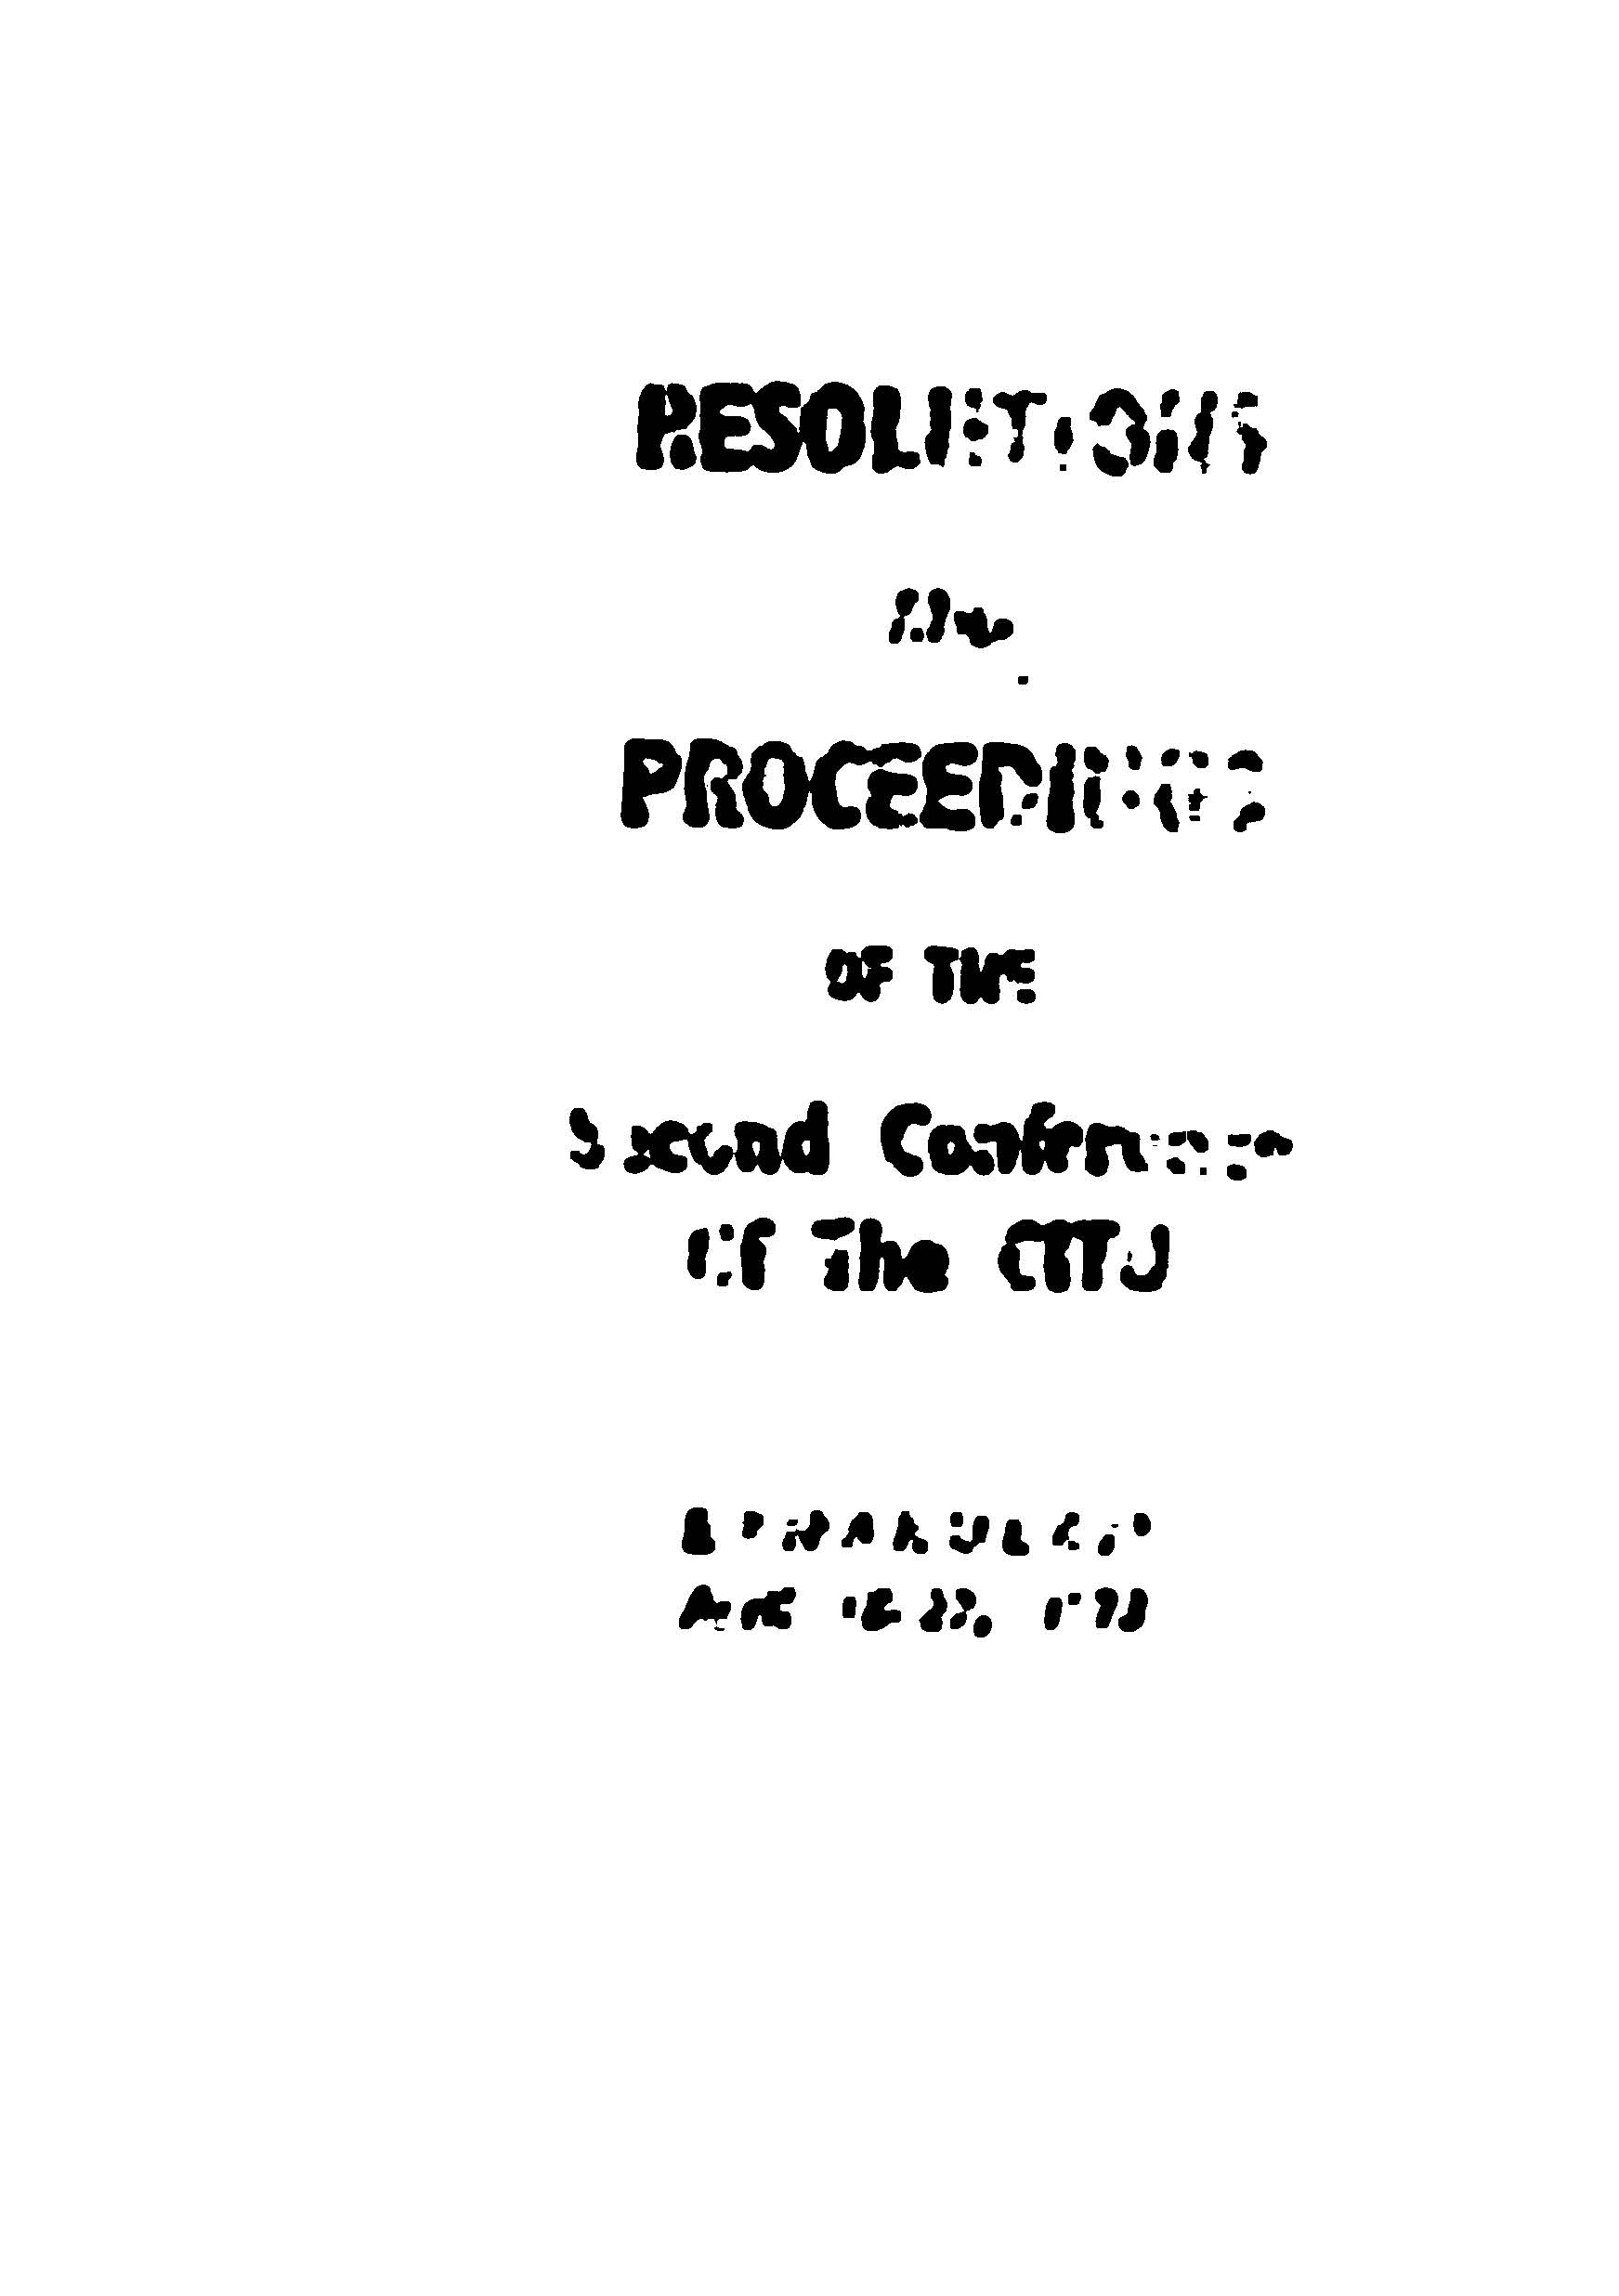 Resolutions of the proceeding of the second conference of the CITU